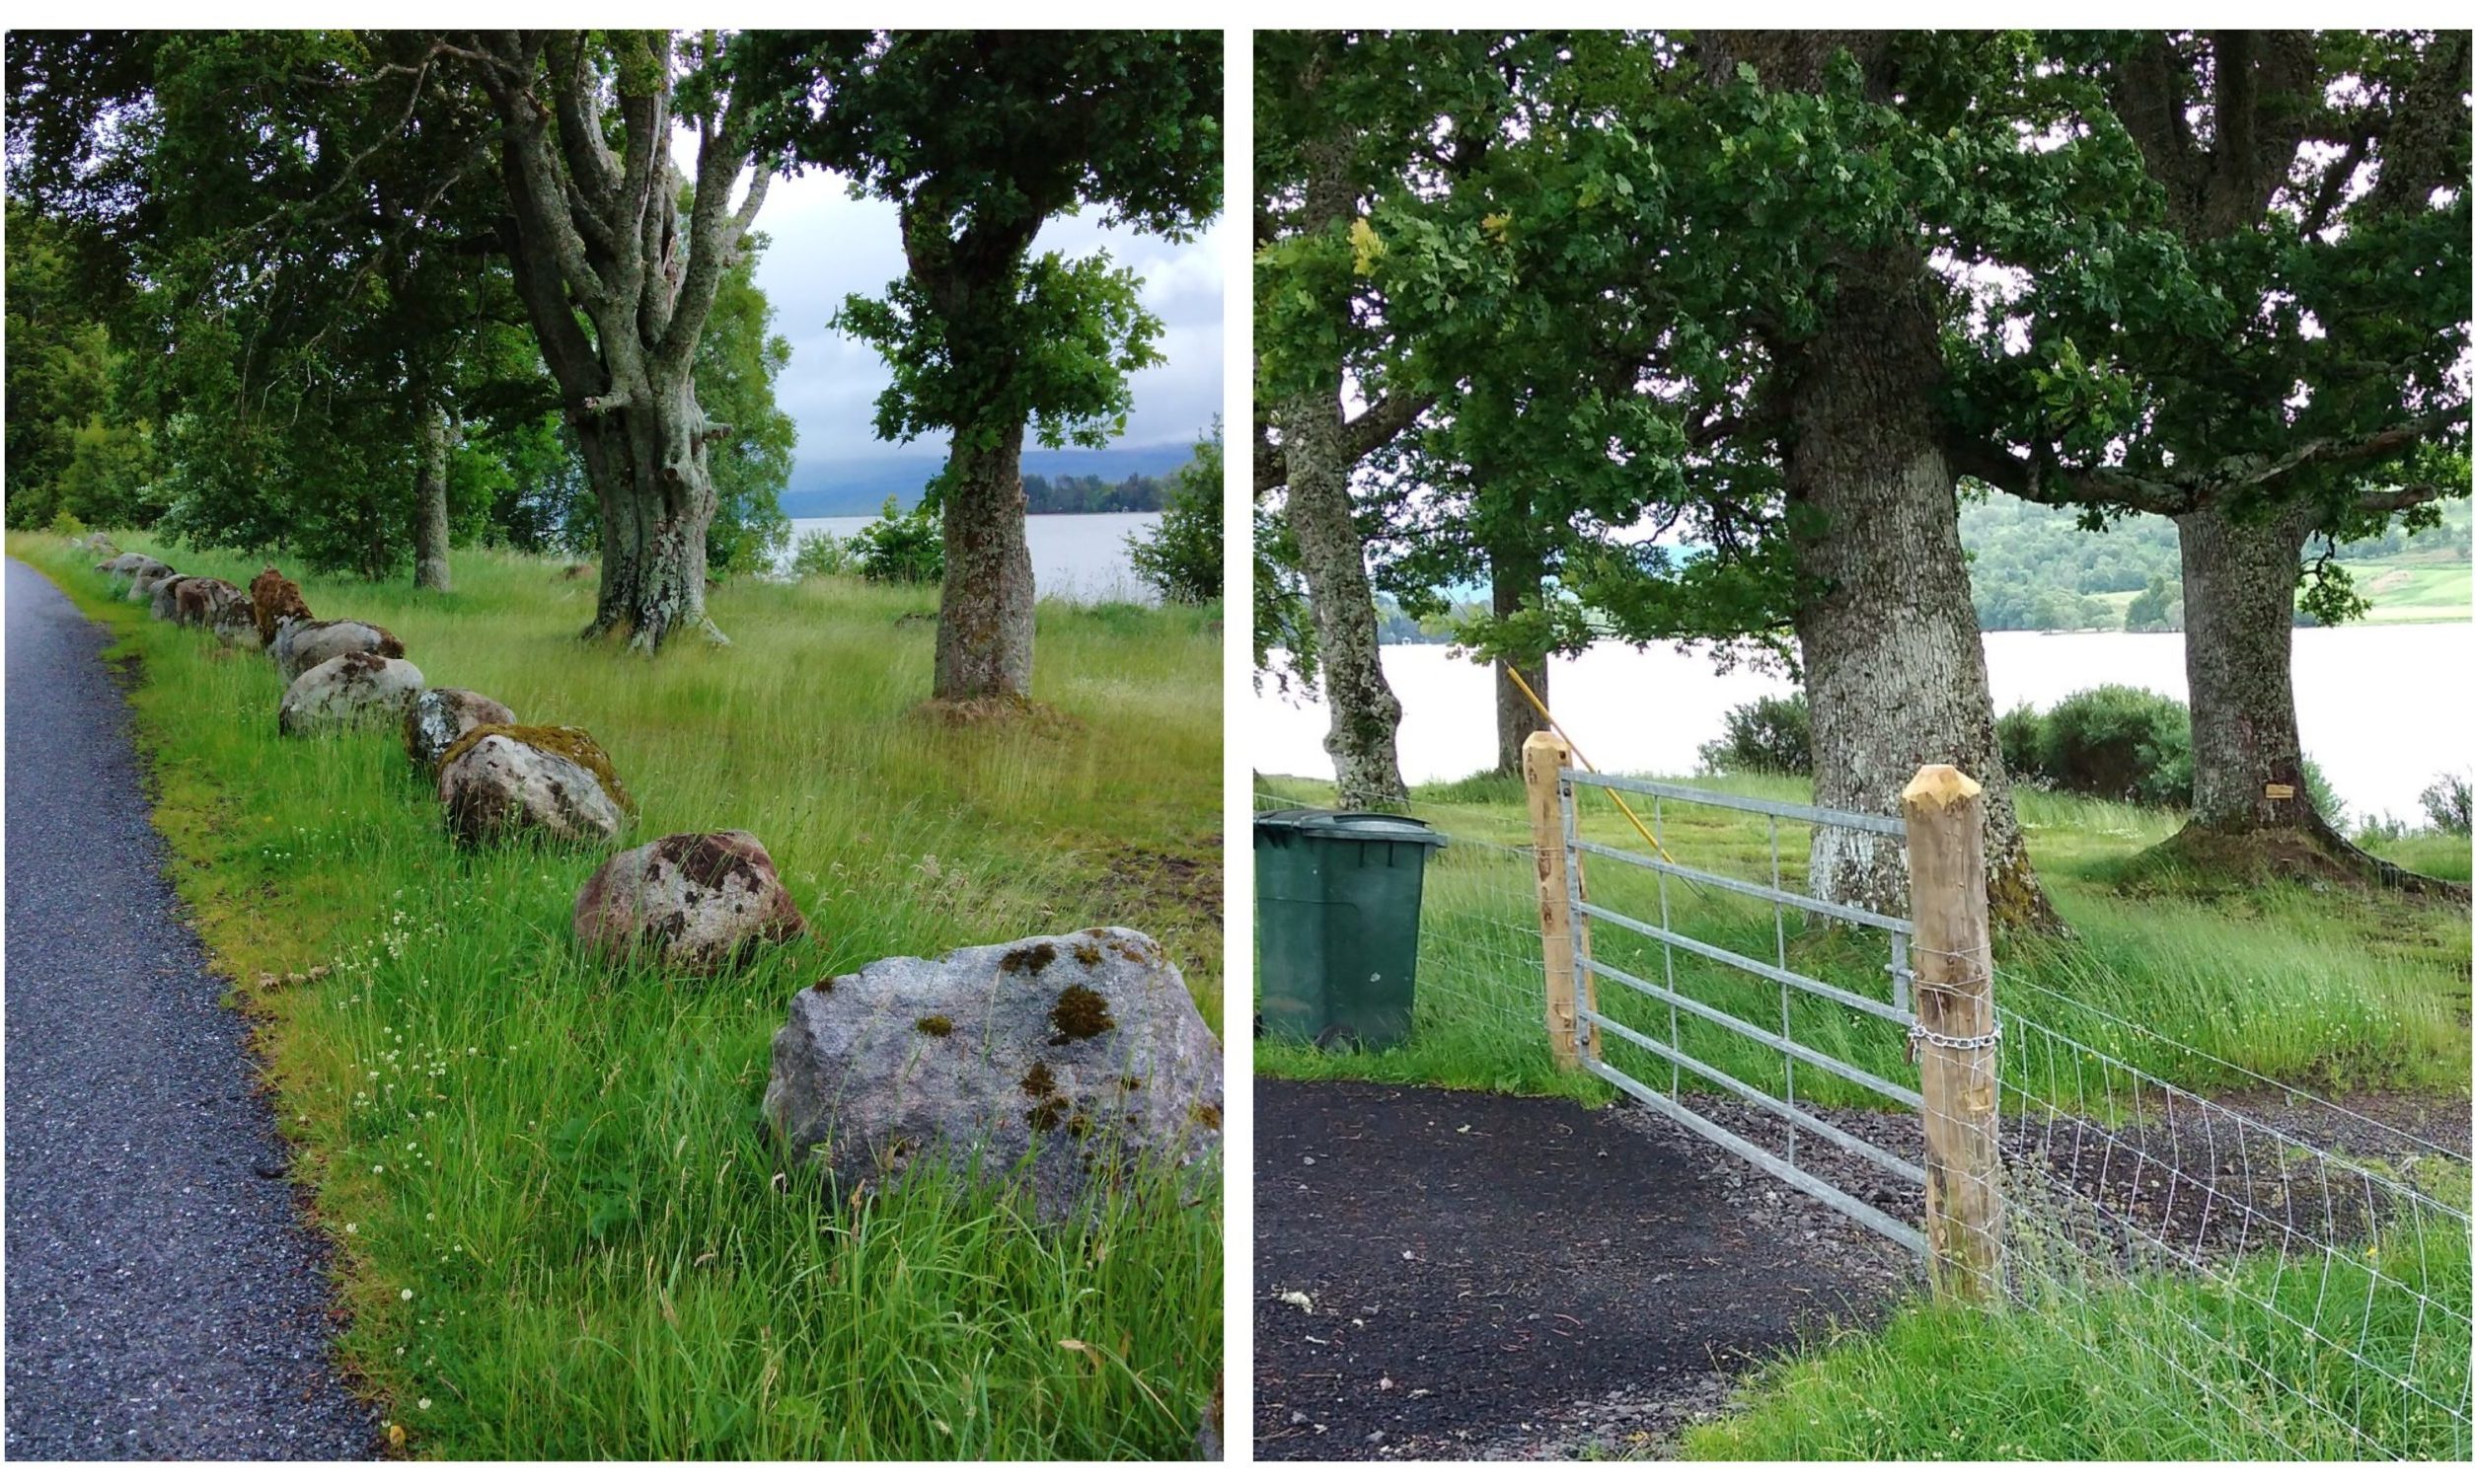 Extra barriers have been installed to deter wild campers at Loch Rannoch.